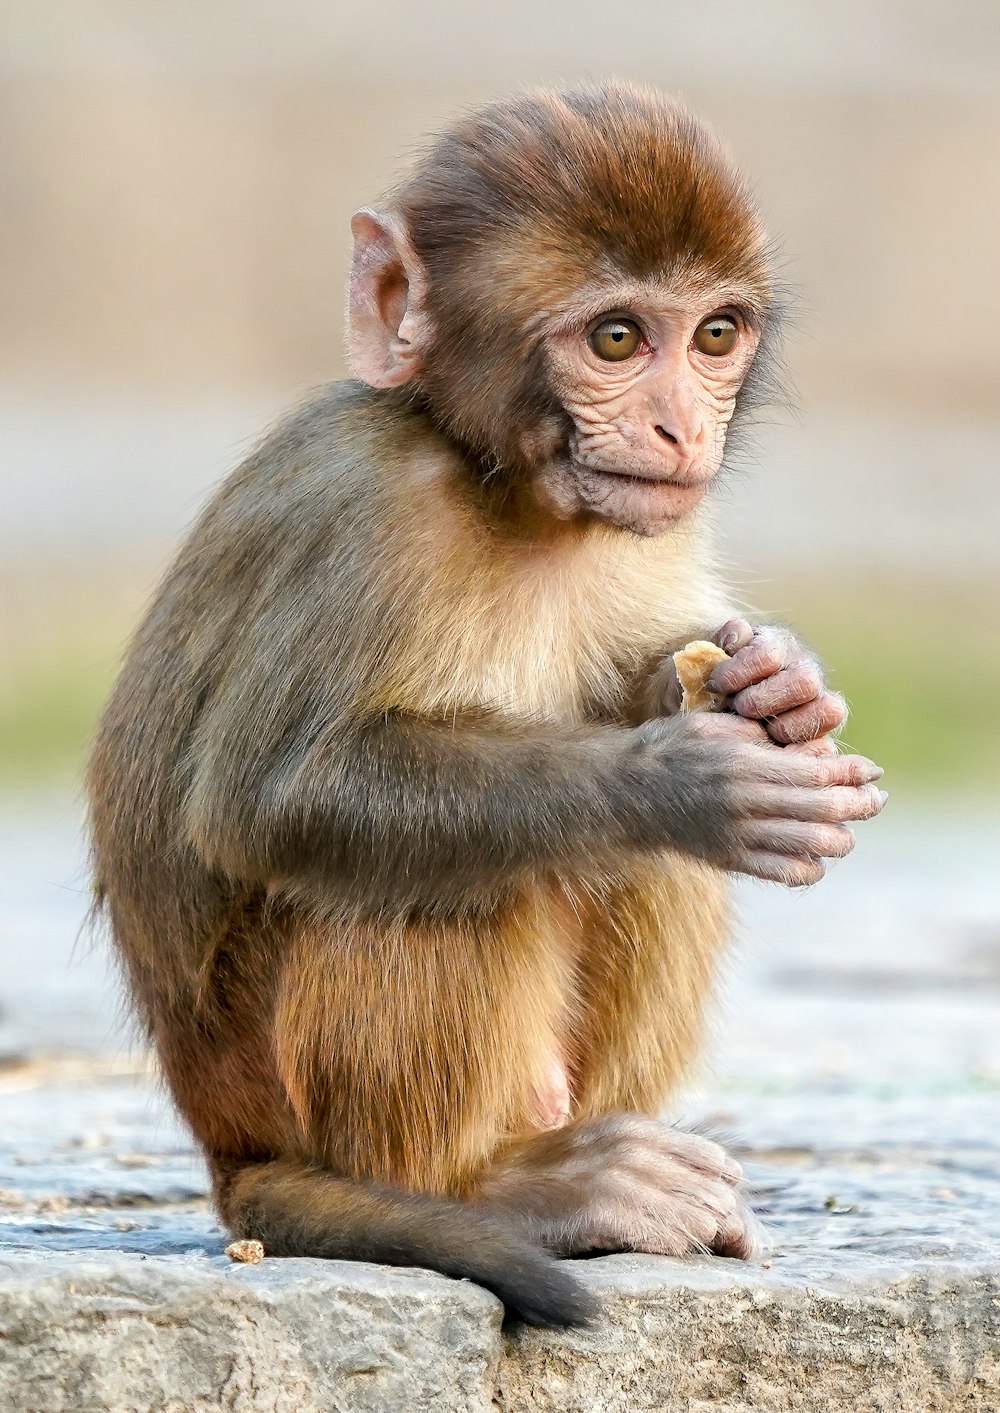 brown monkey sitting on gray concrete floor during daytime